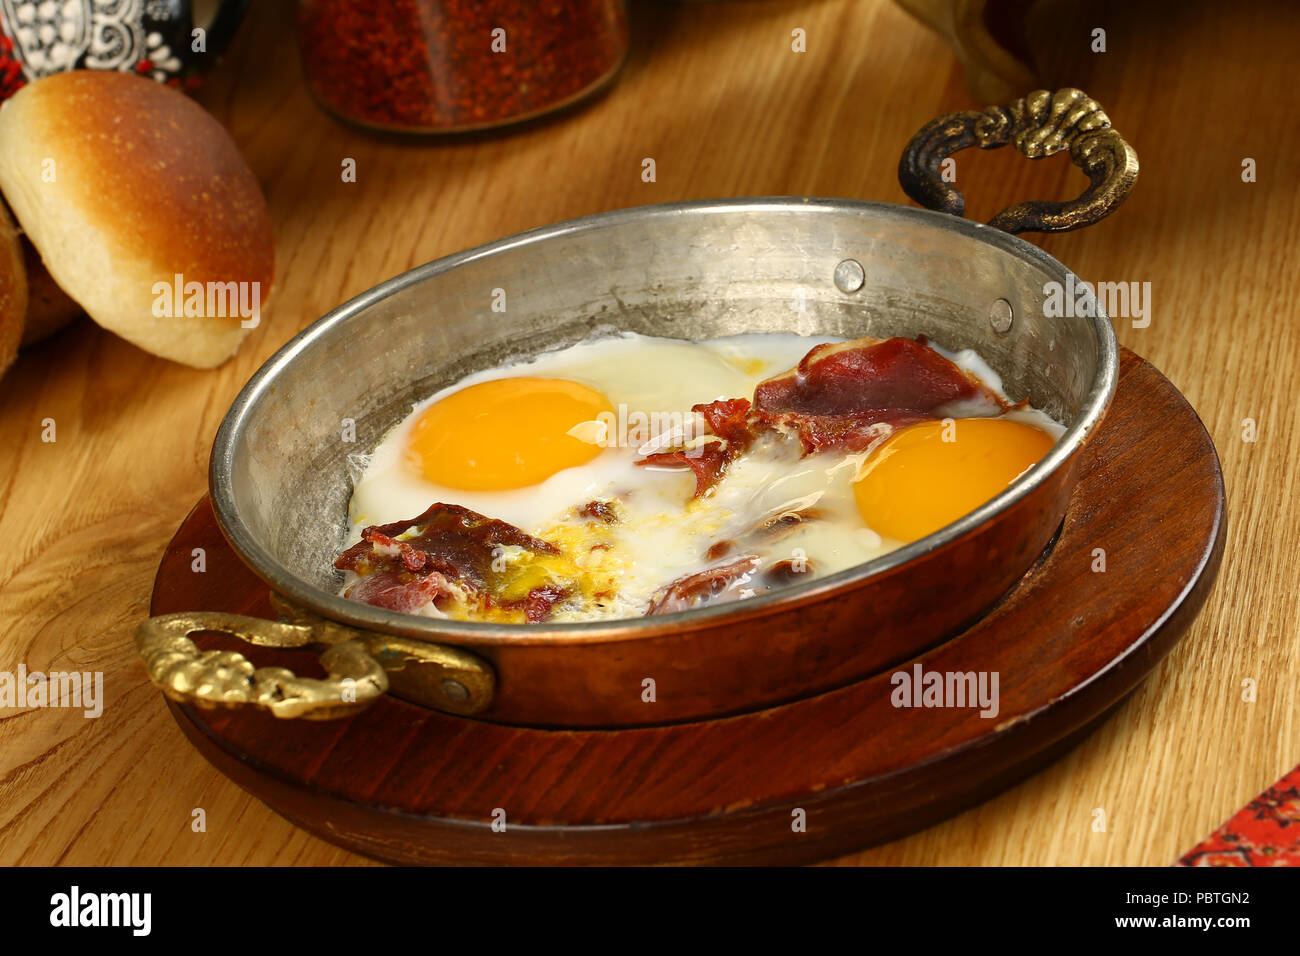 Turkish Breakfast Fried Egg with Pastirma or Pastrami Stock Photo